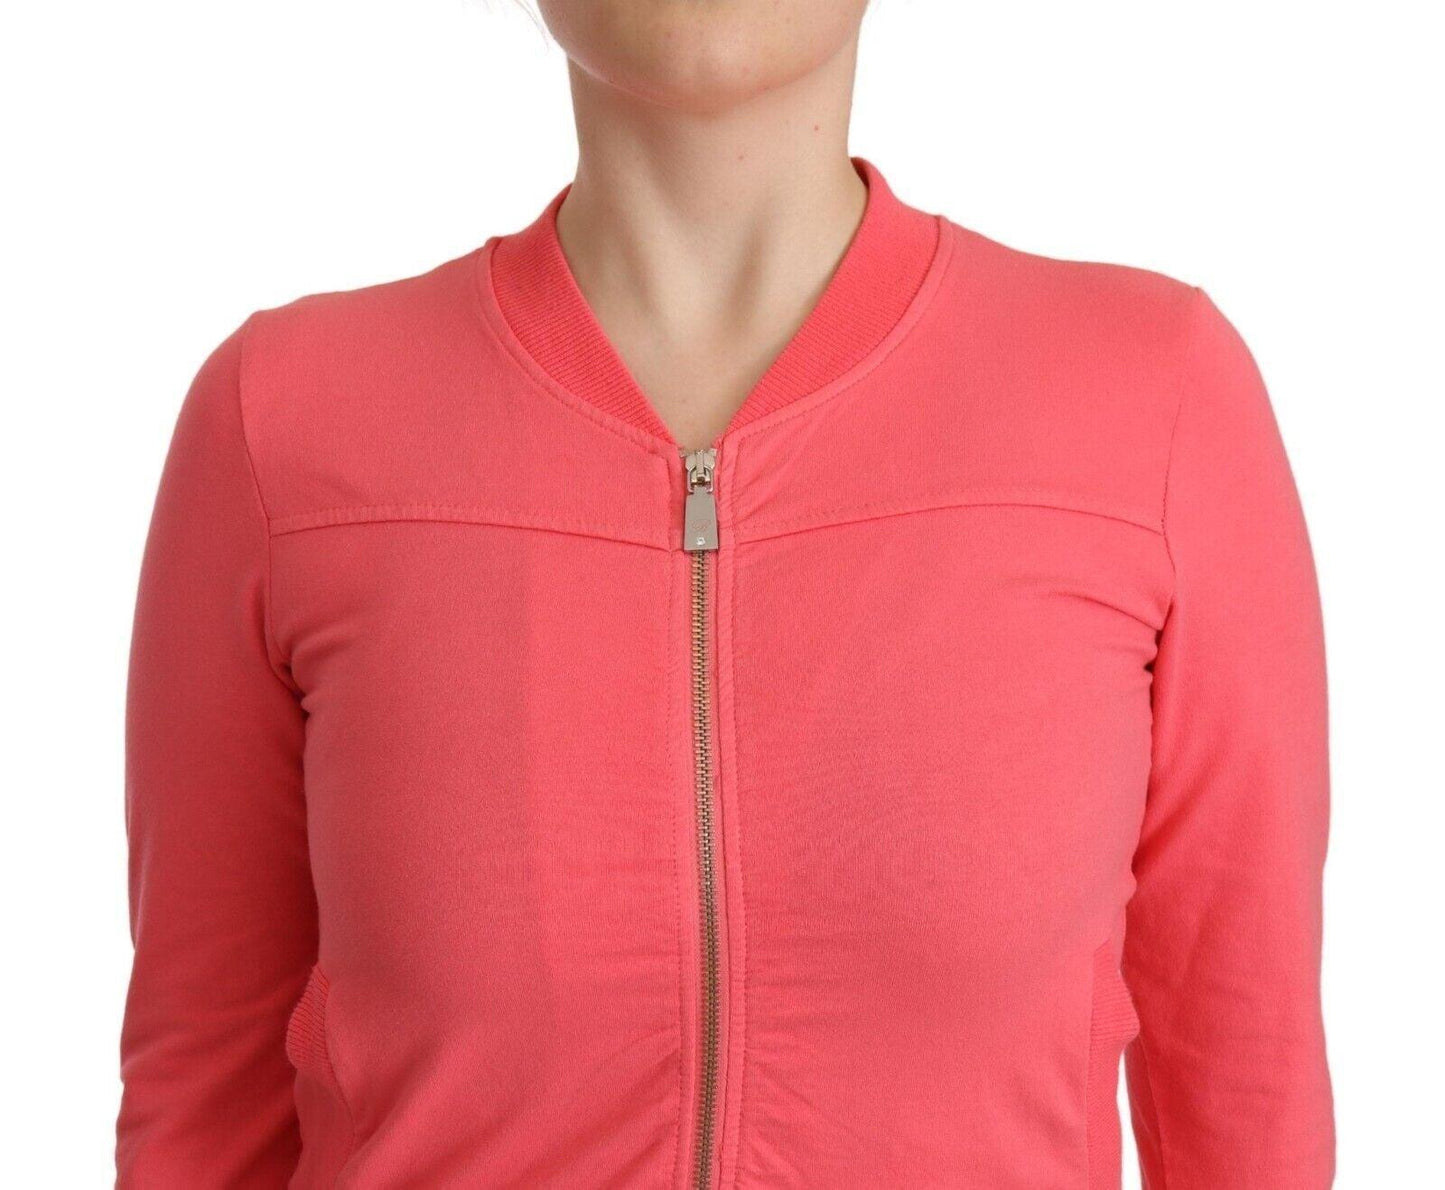 Blumarine Women's Pink 3/4 Sleeve Zip Embellished Sweater - Designed by Blumarine Available to Buy at a Discounted Price on Moon Behind The Hill Online Designer Discount Store